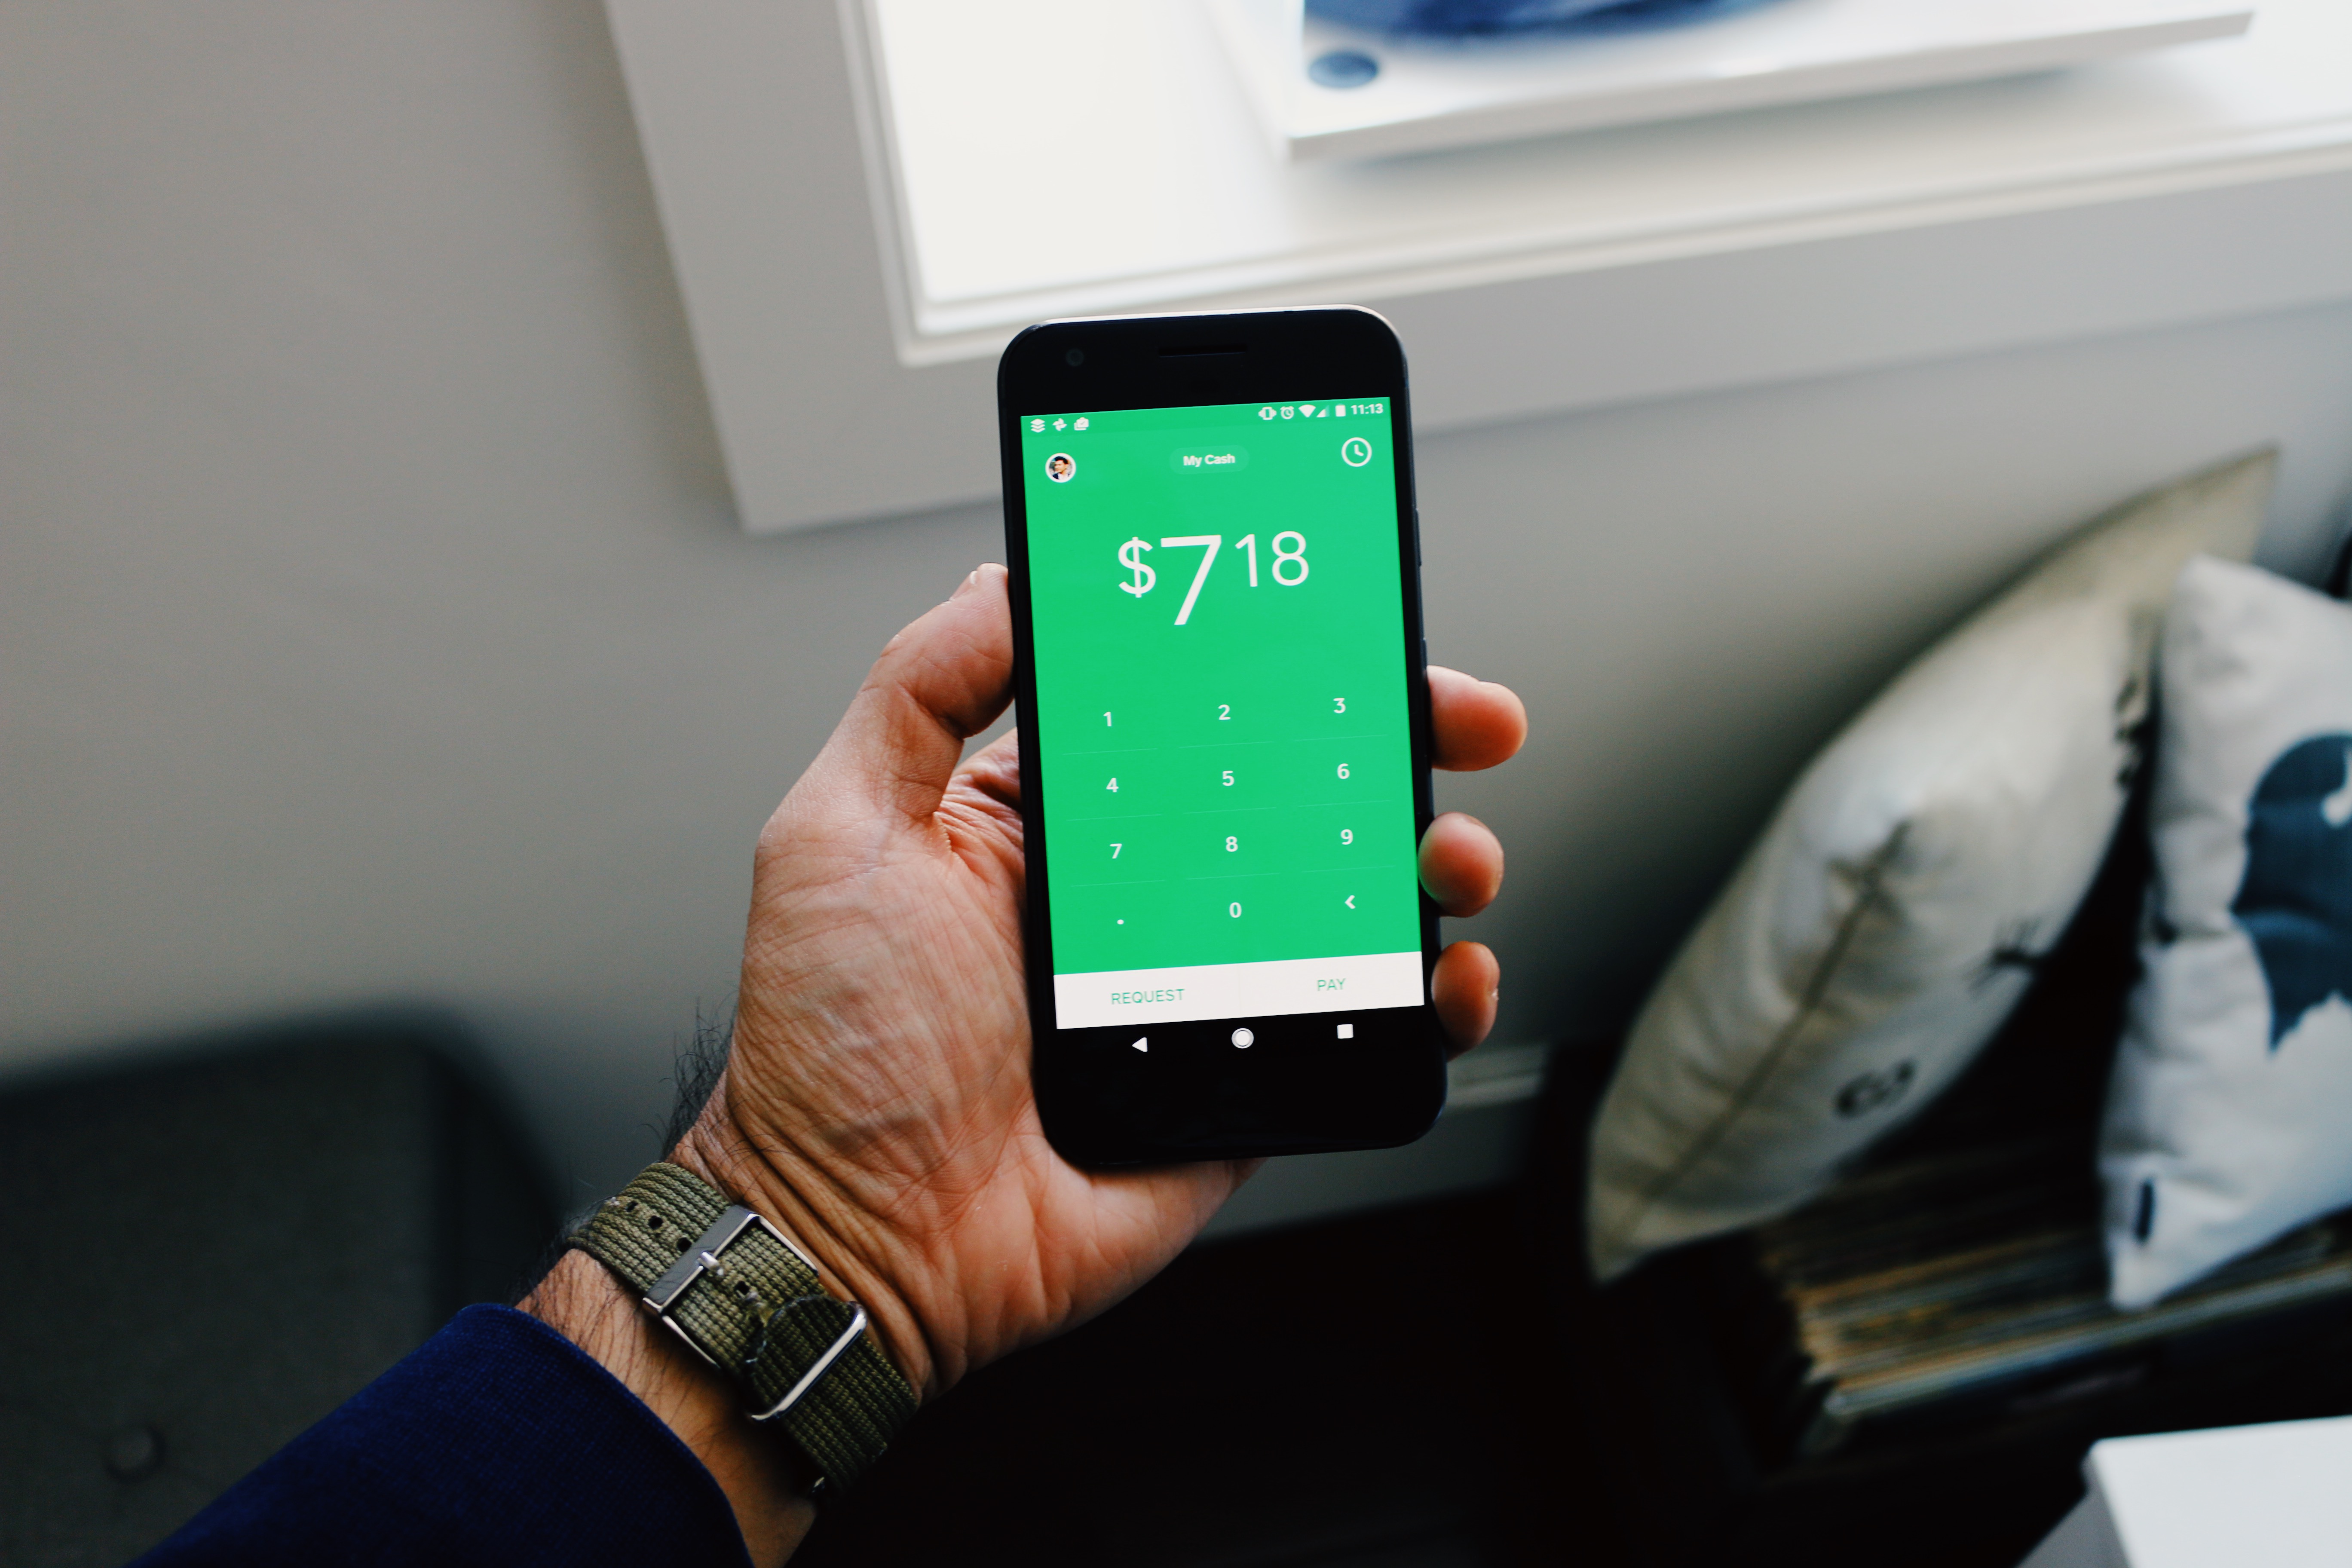 Send money for free with Square Cash